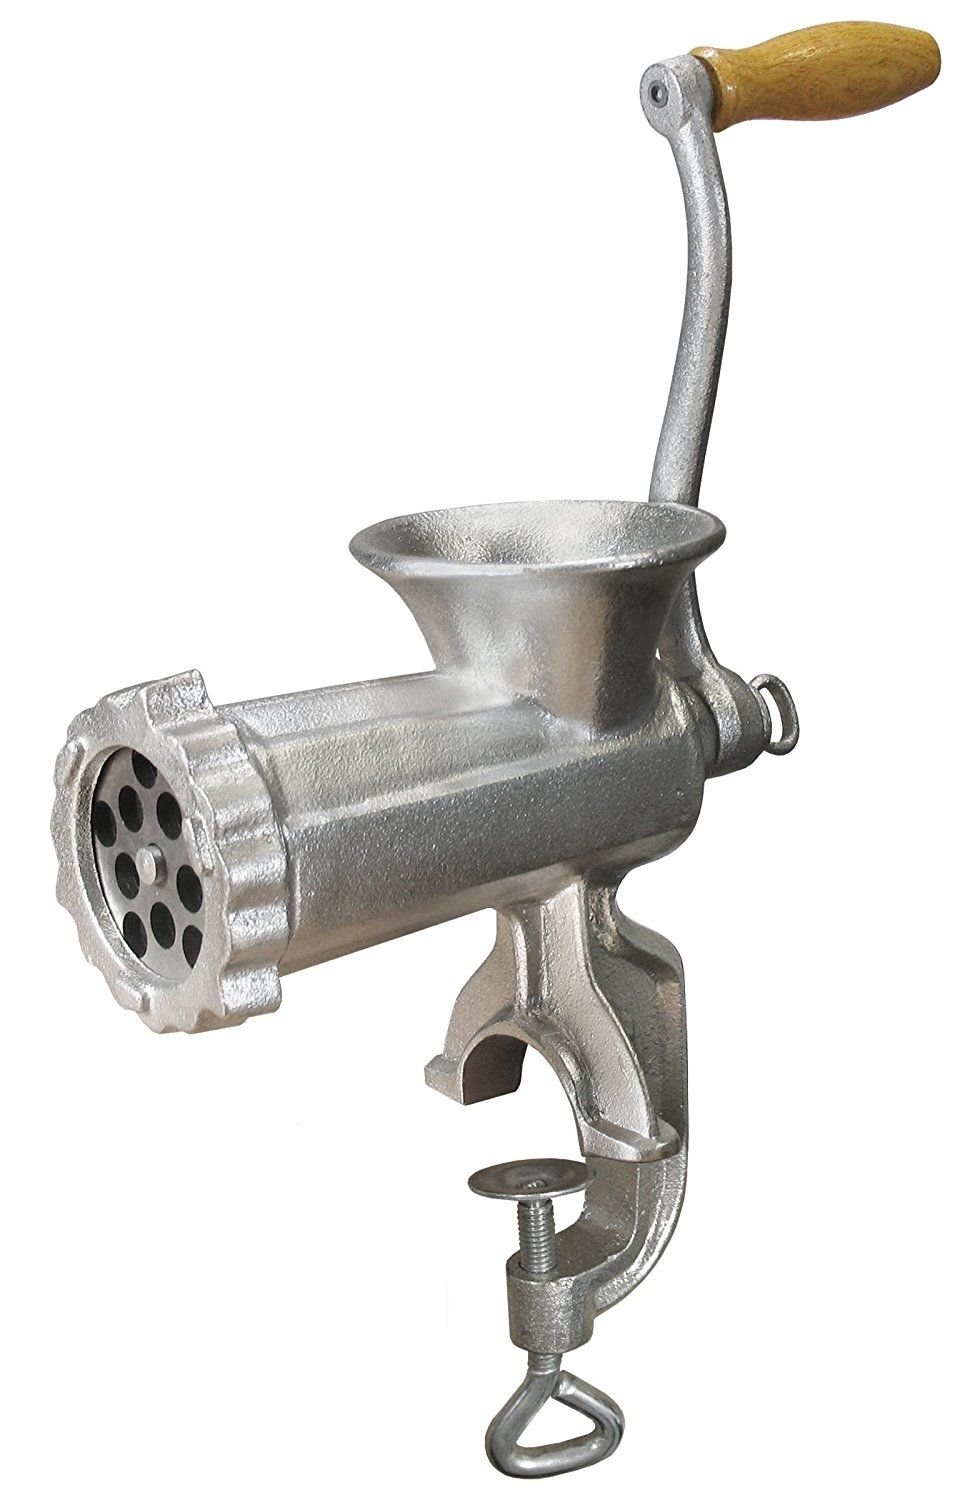 https://cdn.everythingkitchens.com/media/catalog/product/cache/70d878061ea71e5b62358b2b67547186/w/e/weston_10_manual_meat_grinder_with_c-clamp_-_36-1001-w.jpg